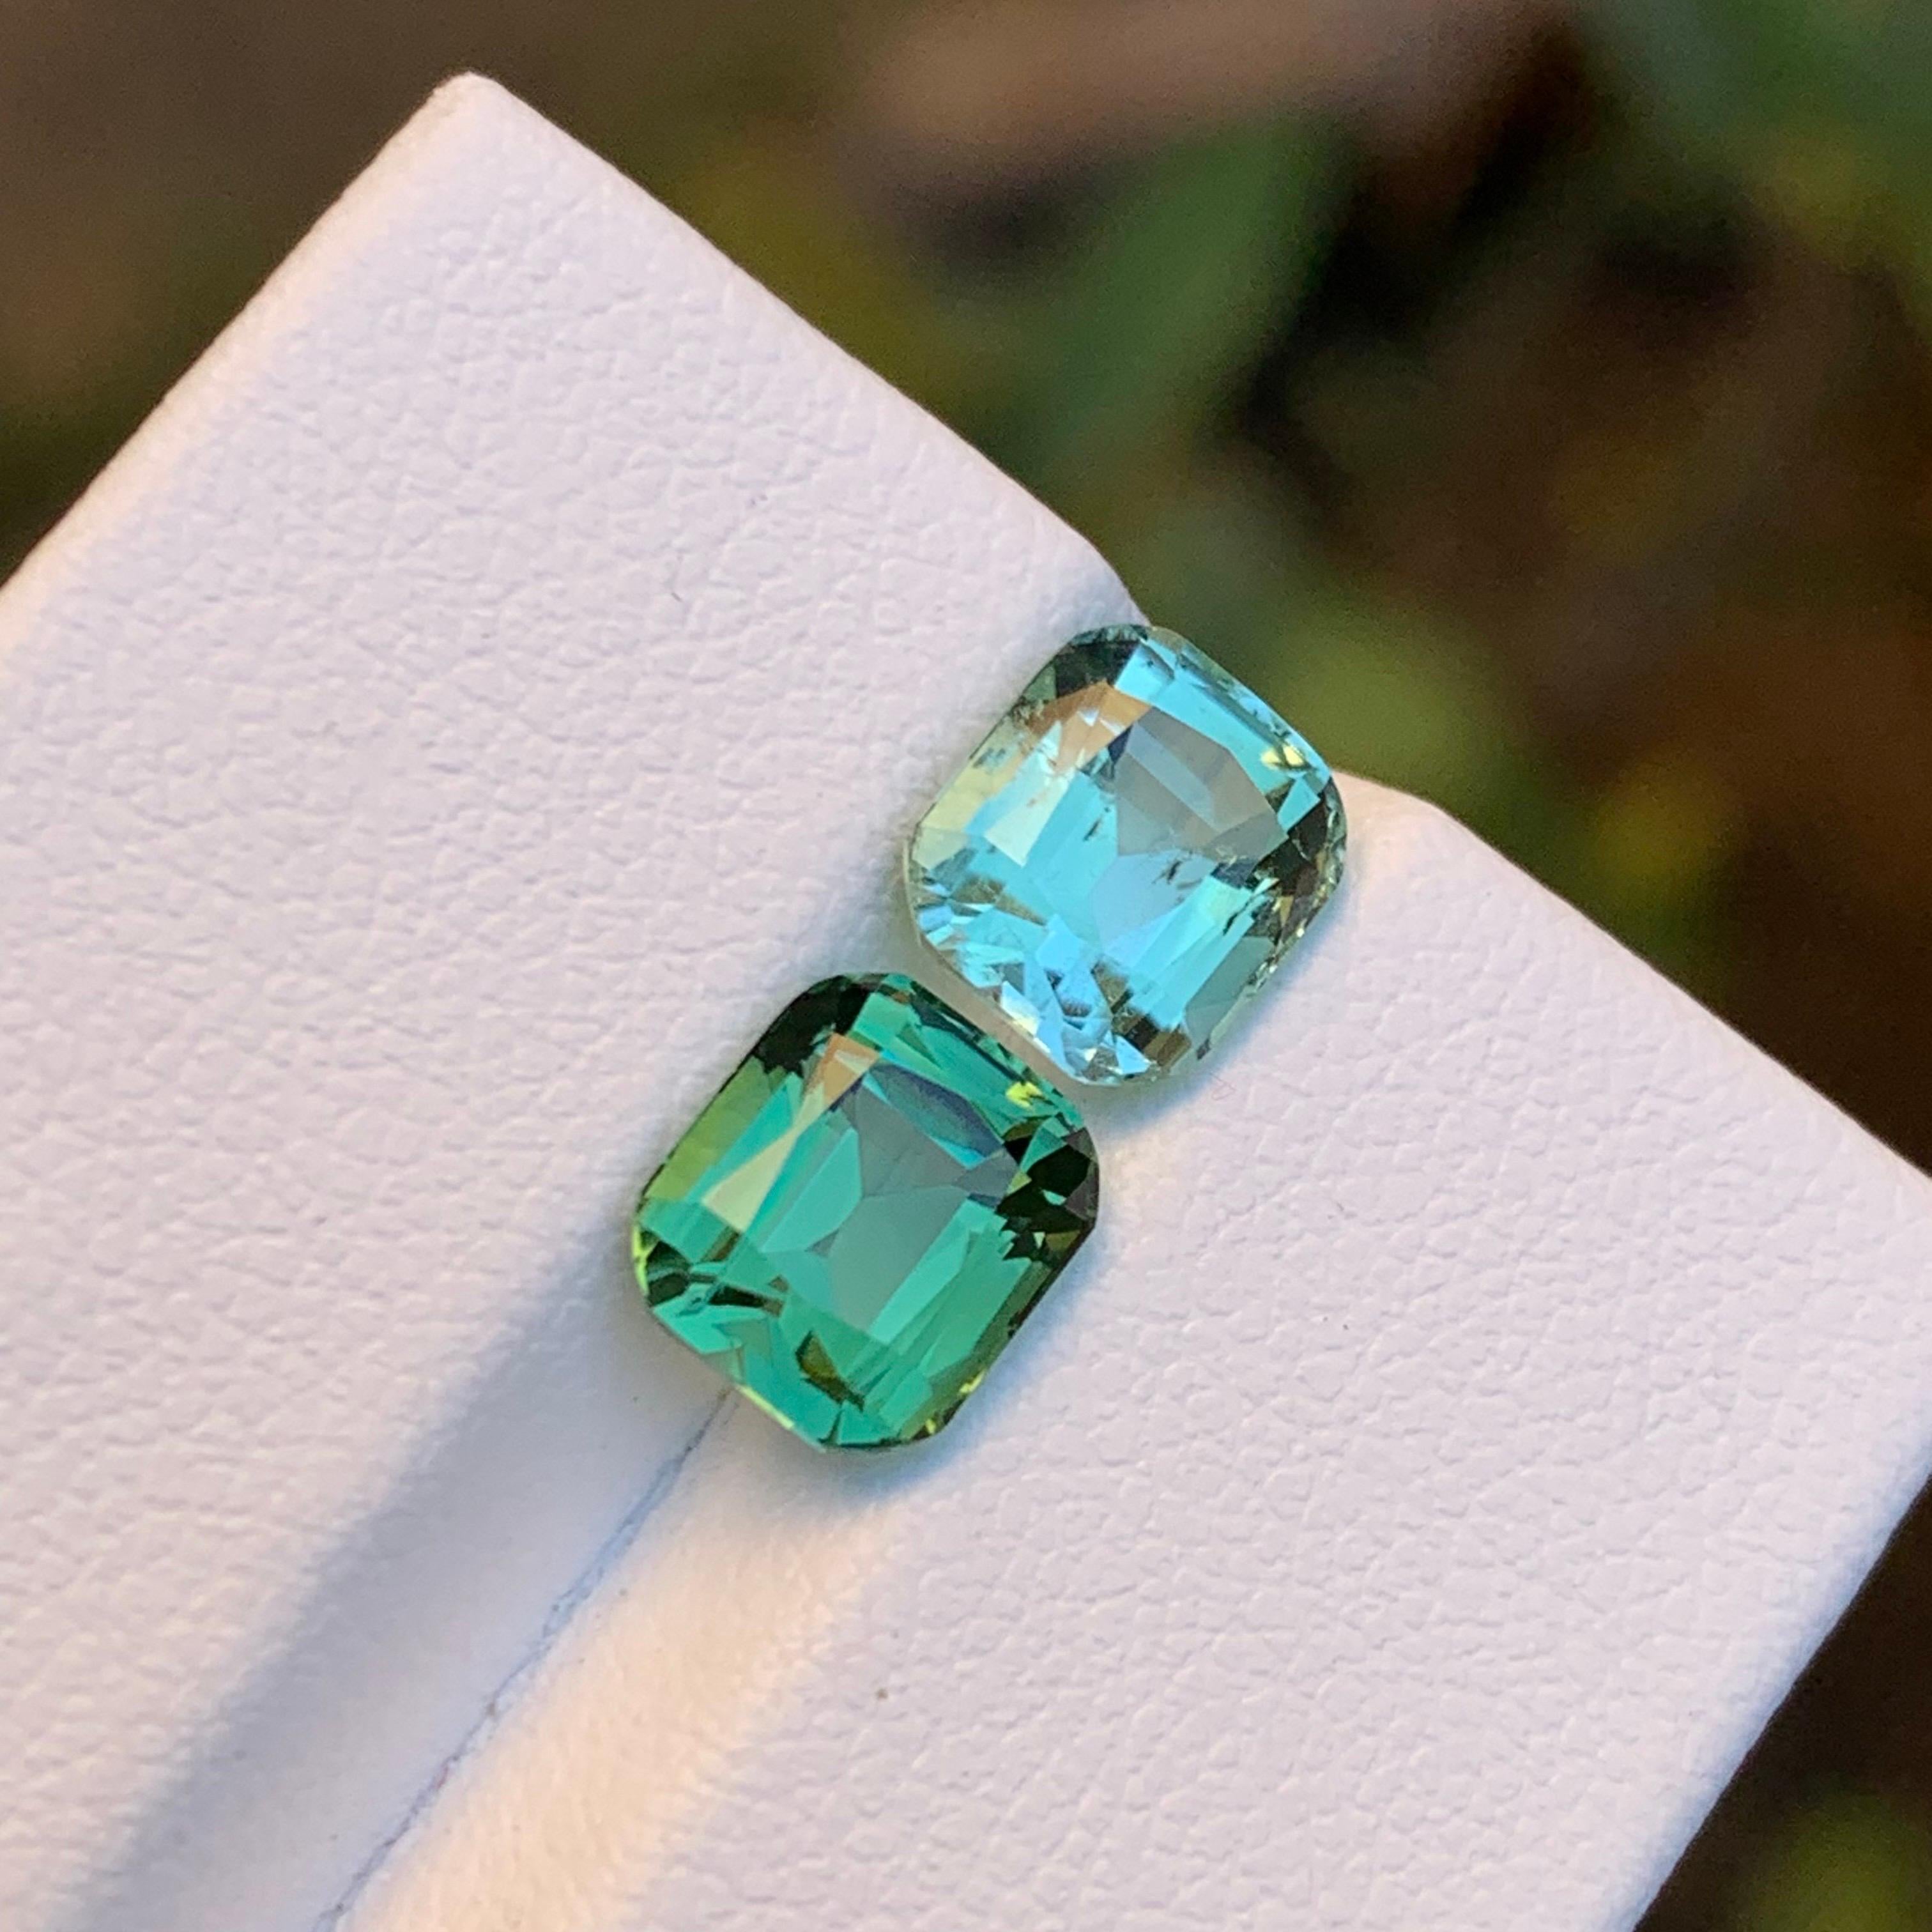 Elevate your jewelry creations with these enchanting natural Tourmaline Loose Gemstones. Skillfully crafted in a captivating cushion cut design, the exquisite seafoam and green reverse pairs add a touch of elegance to any setting. Whether you're